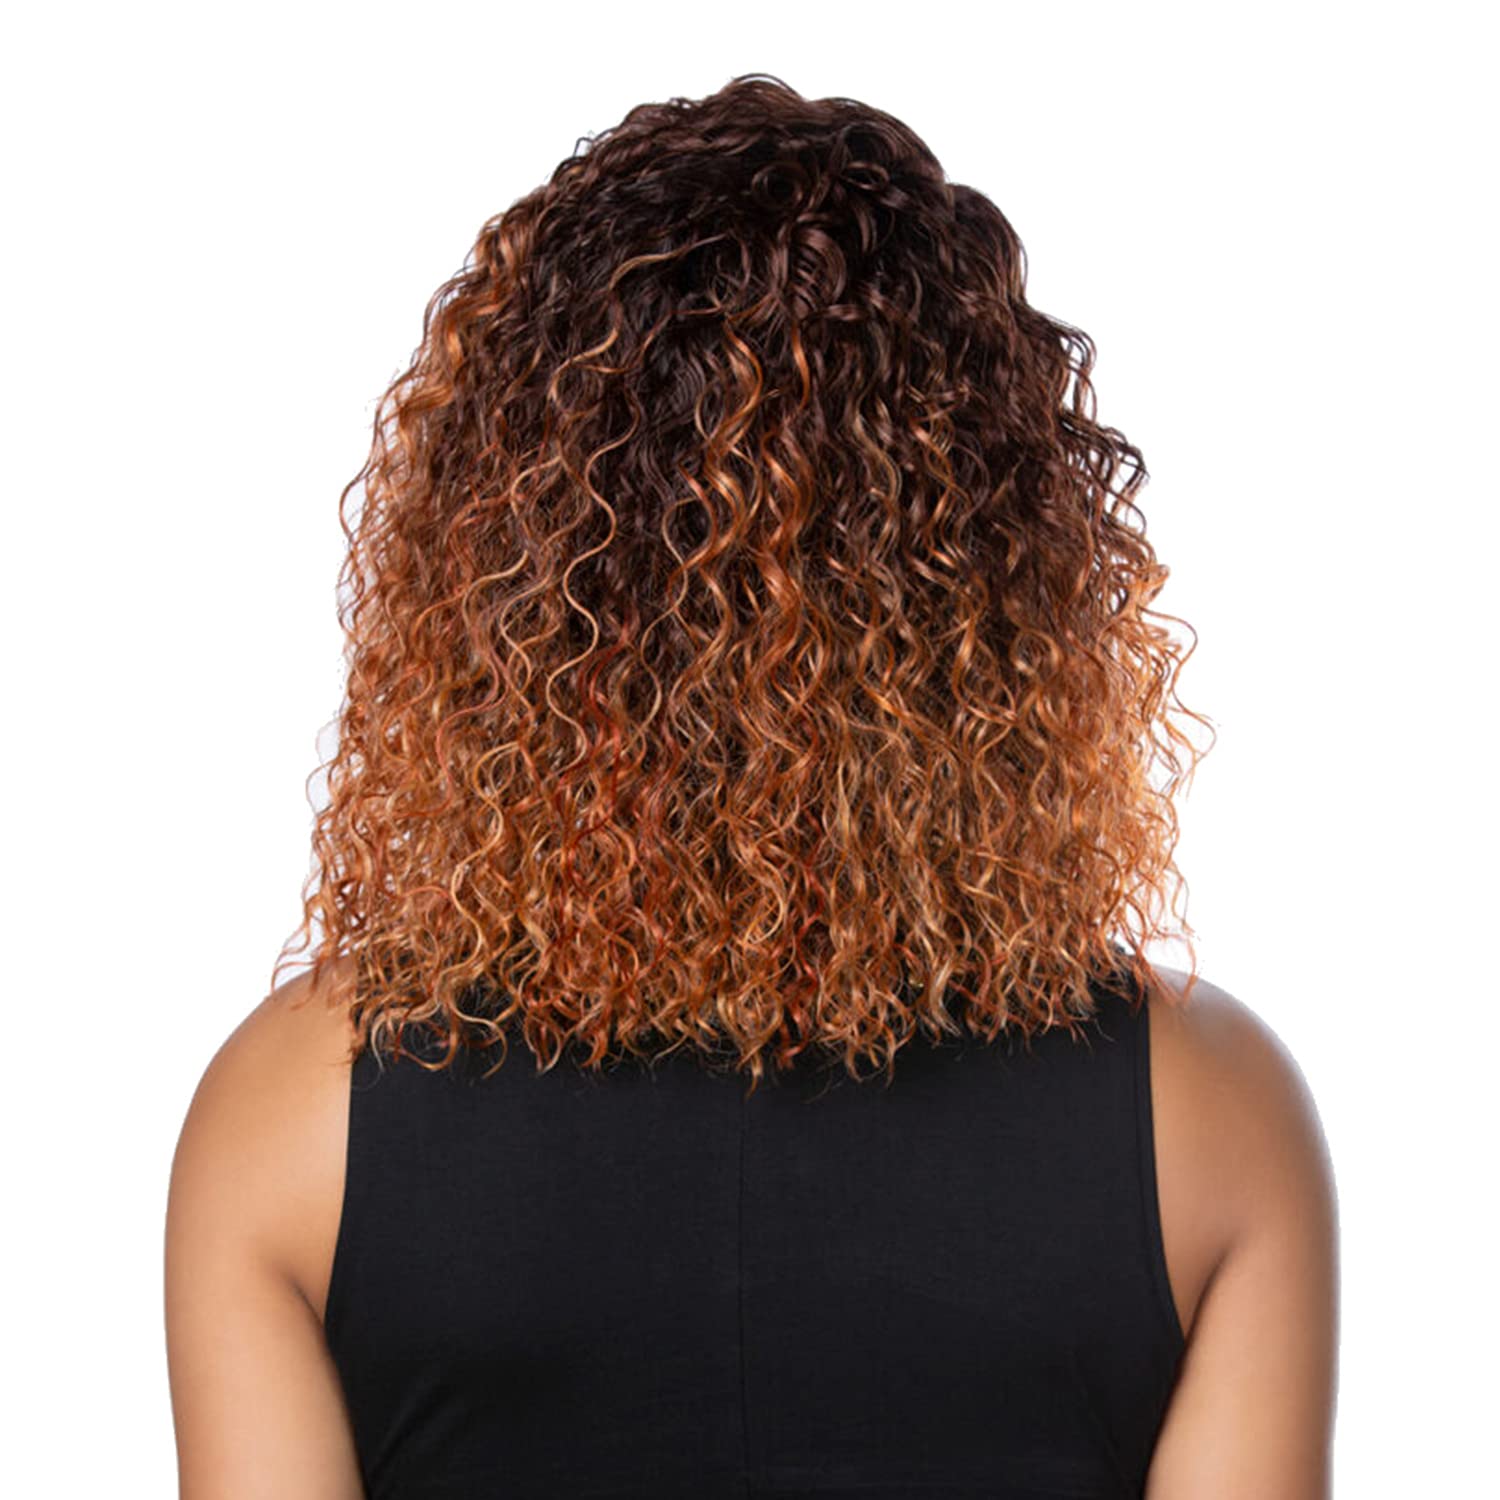 Harlem 125 GoGo Ultra HD Undetectable Lace Wig GL208 (1B) Find Your New Look Today!